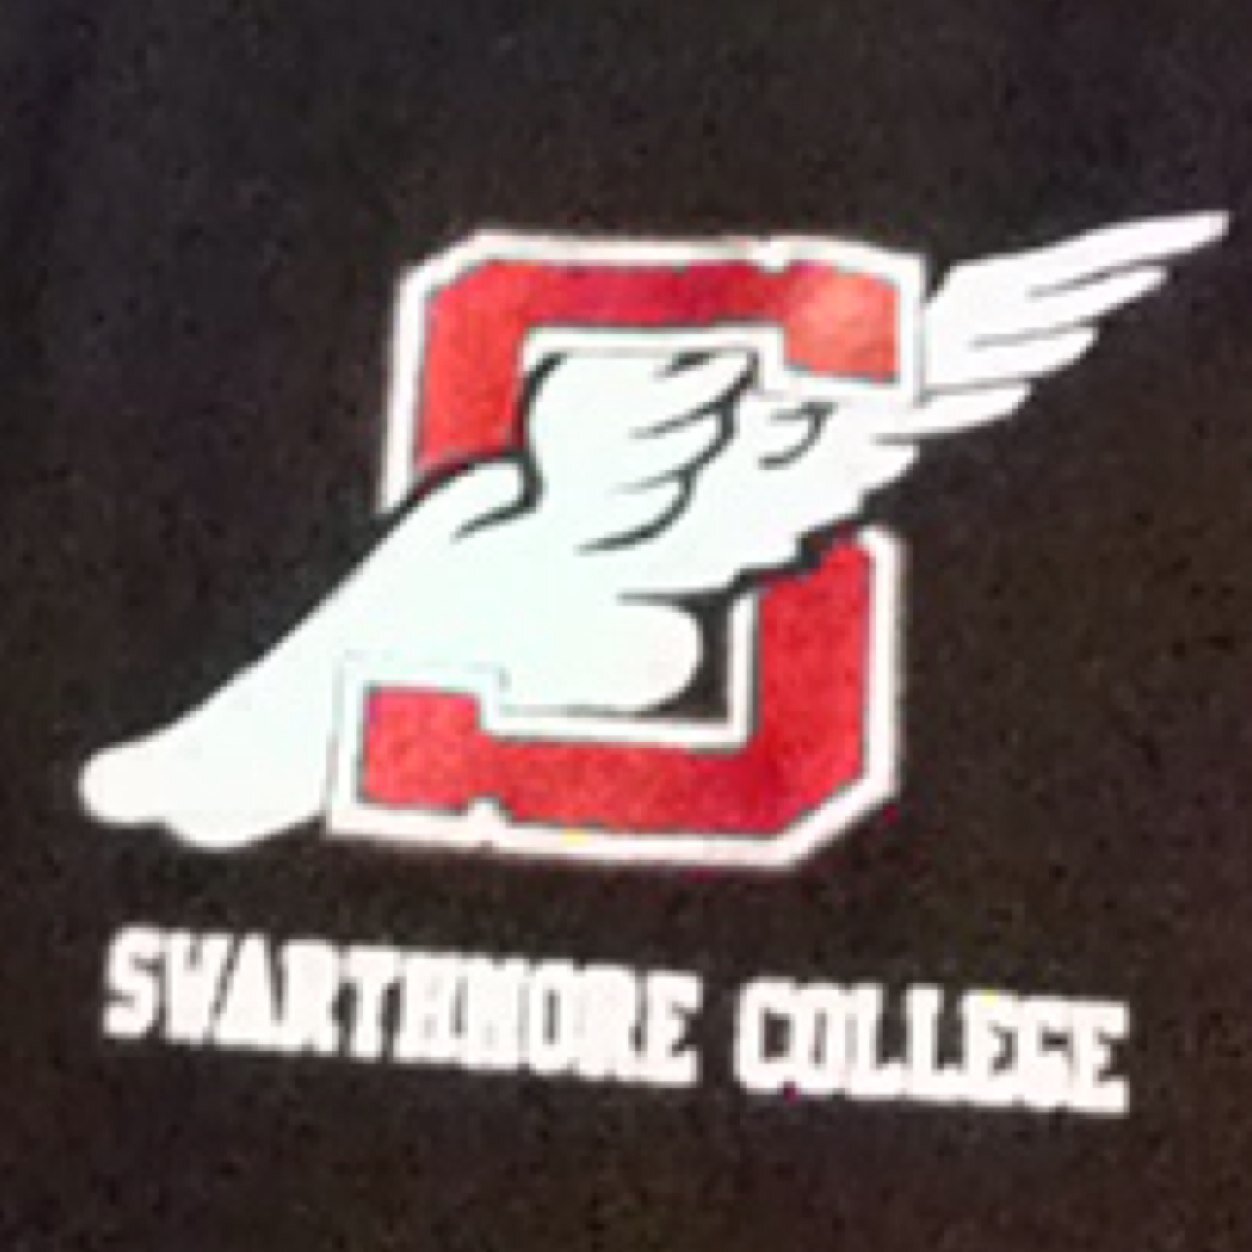 The official Twitter of Swarthmore College Cross Country and Track & Field #cctrack14 #GoGarnet